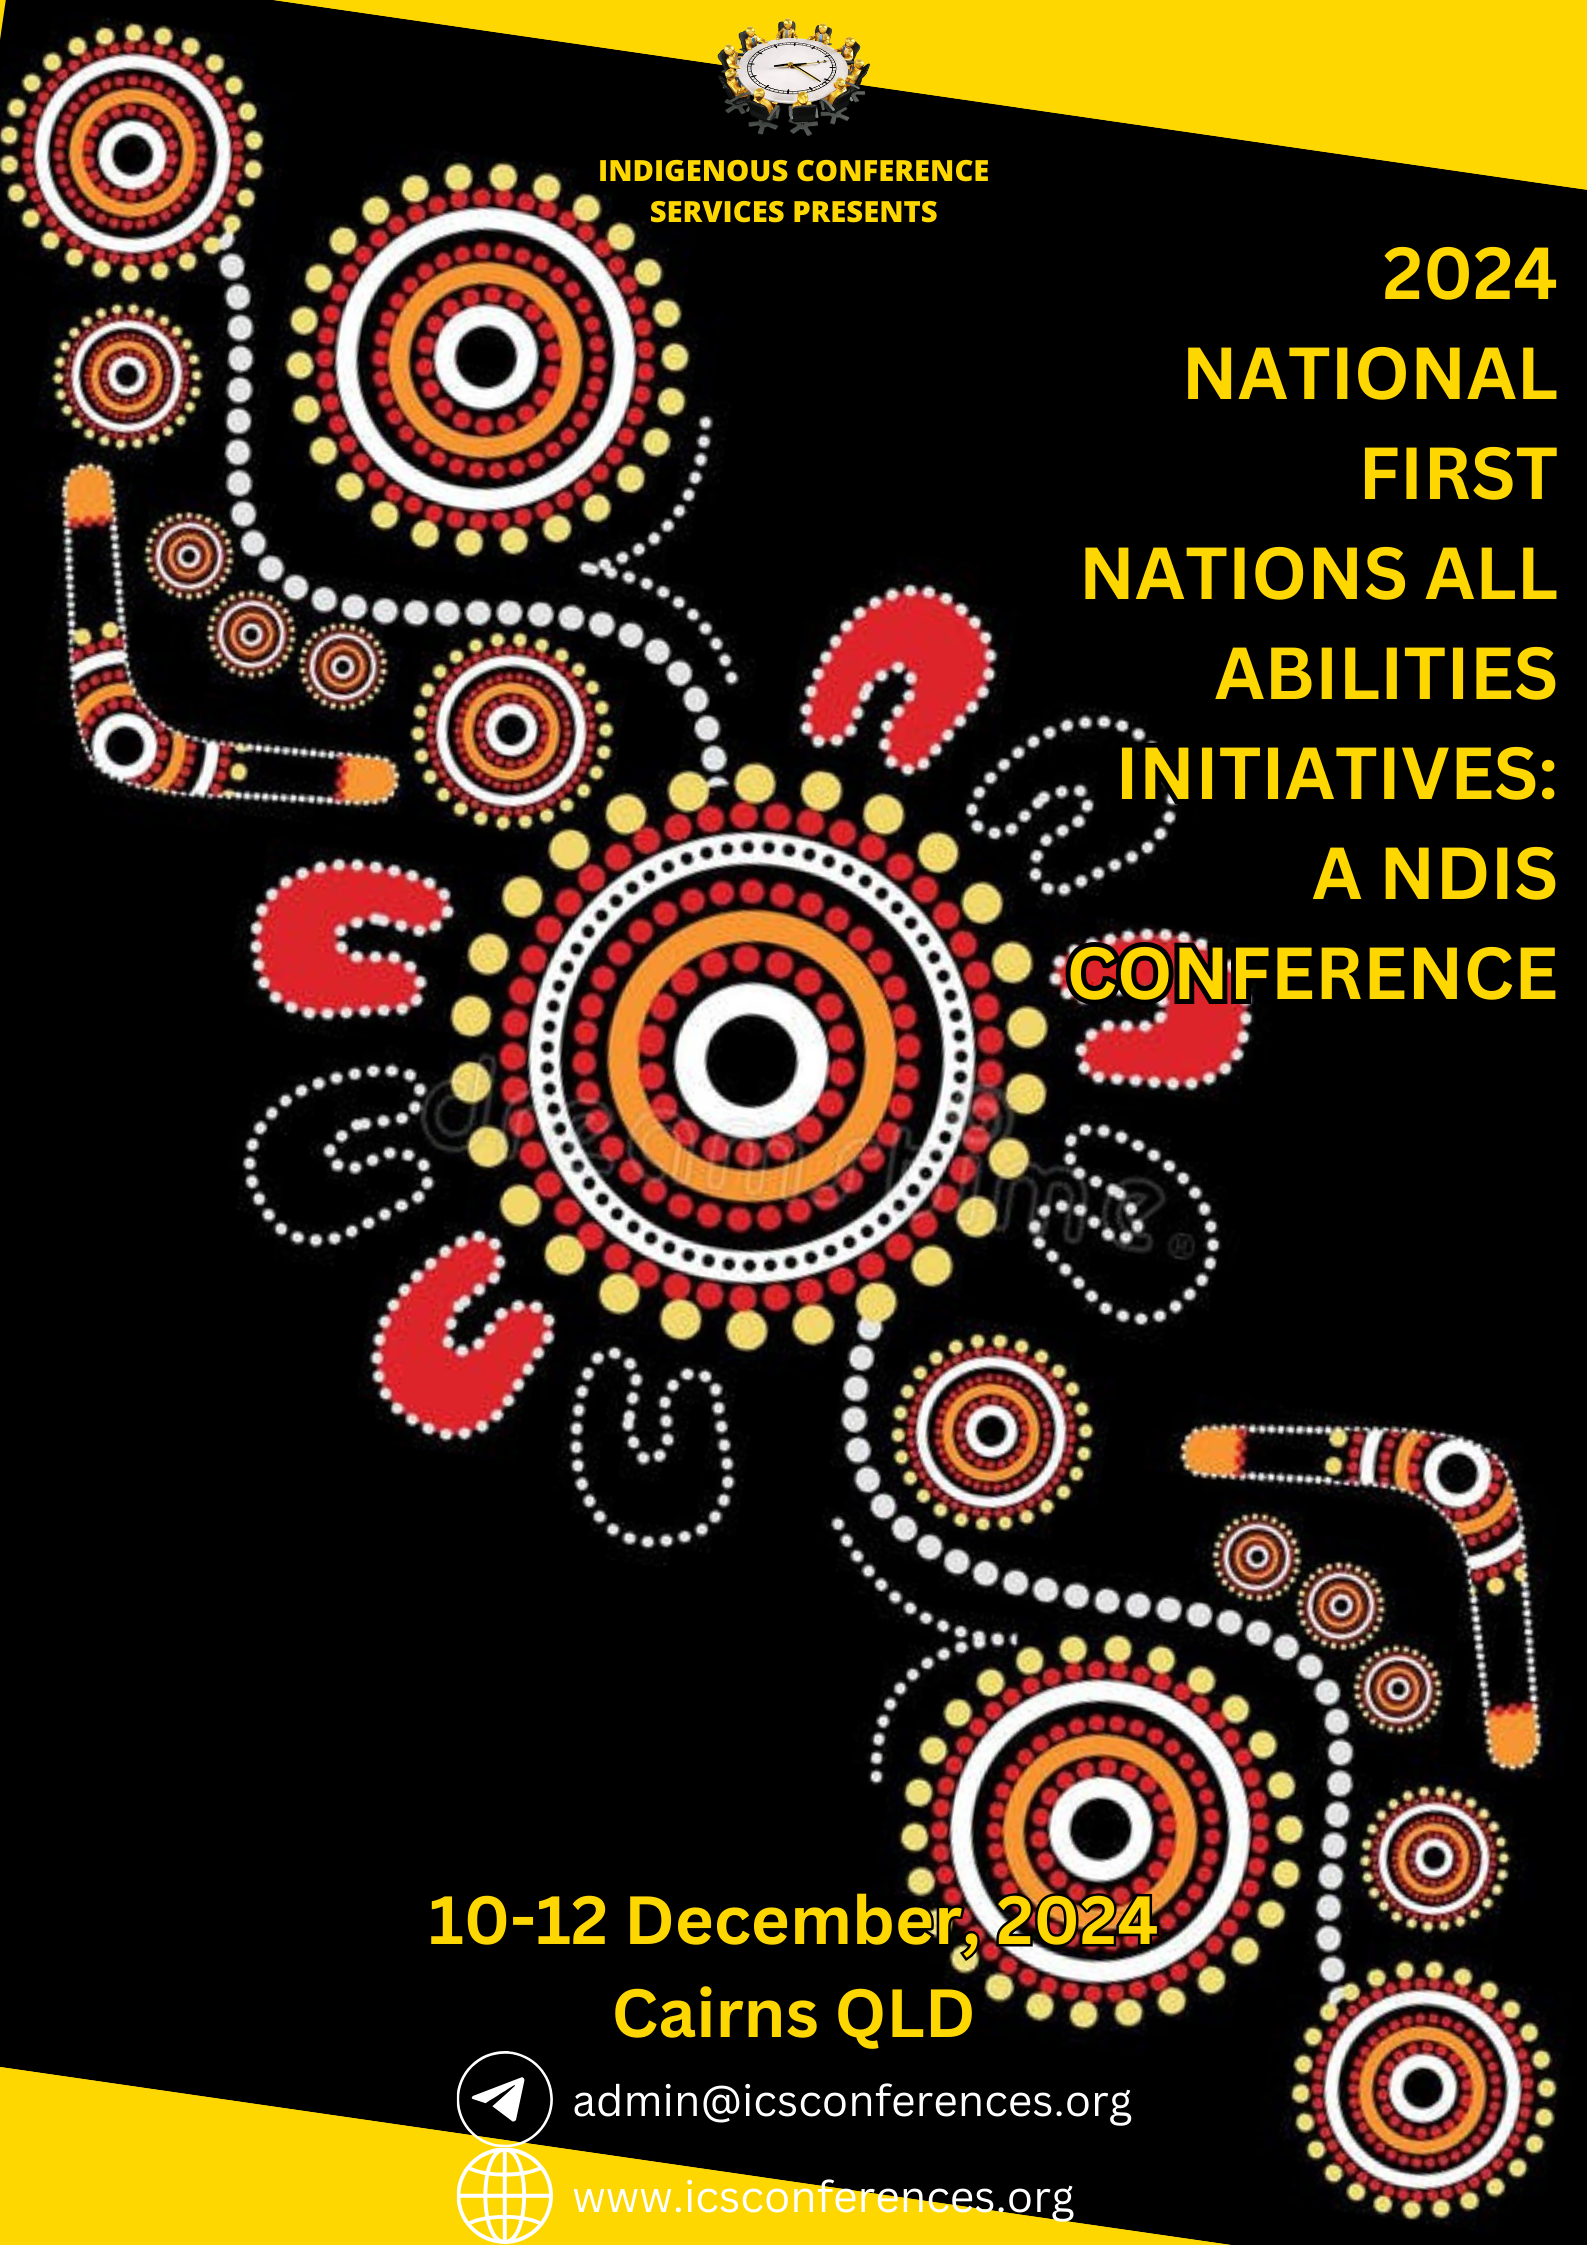 2024 First Nations National All Abilities Initiatives: A NDIS Conference